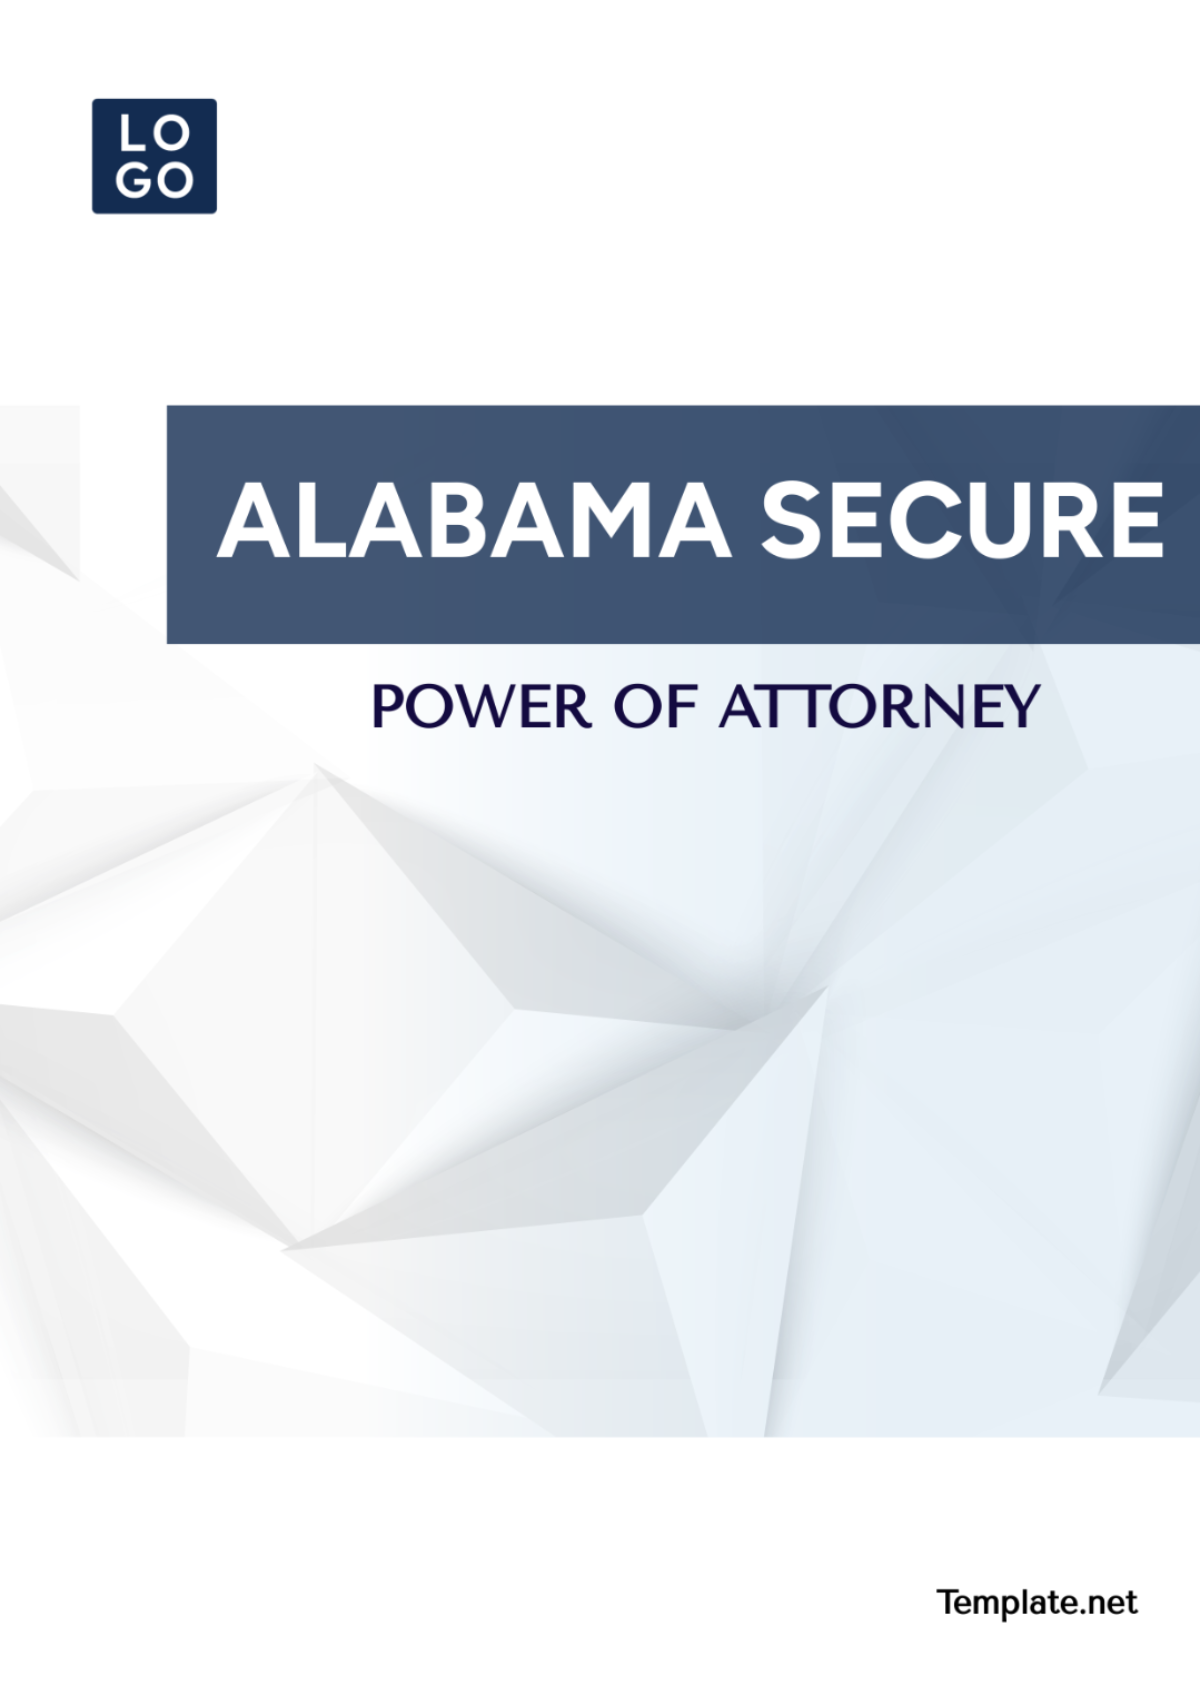 Alabama Secure Power of Attorney Template